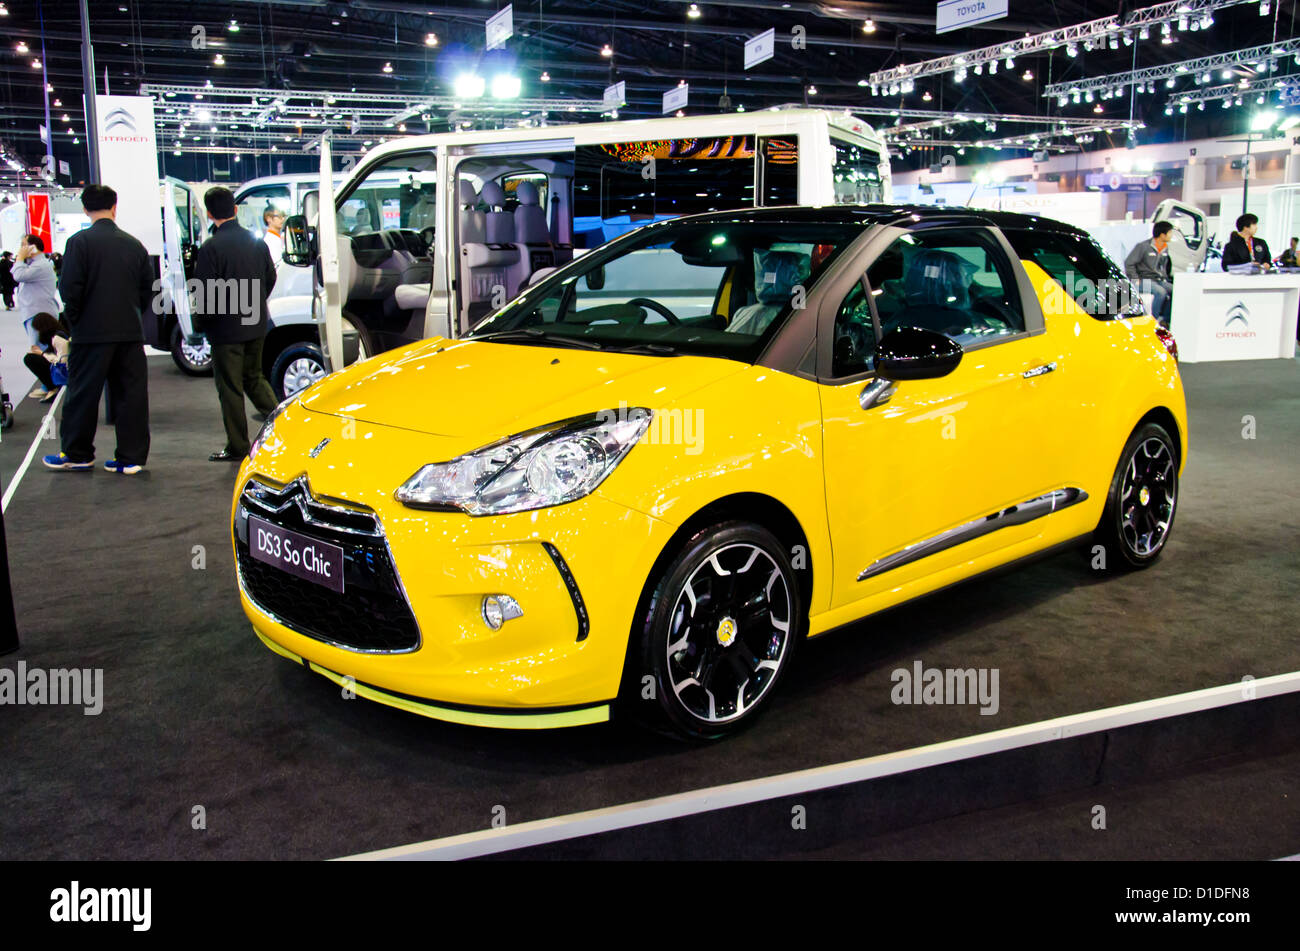 The Citroen DS3 car on display at The 29th Thailand International Motor Expo on November 28, 2012 in Nonthaburi, Thailand. Stock Photo